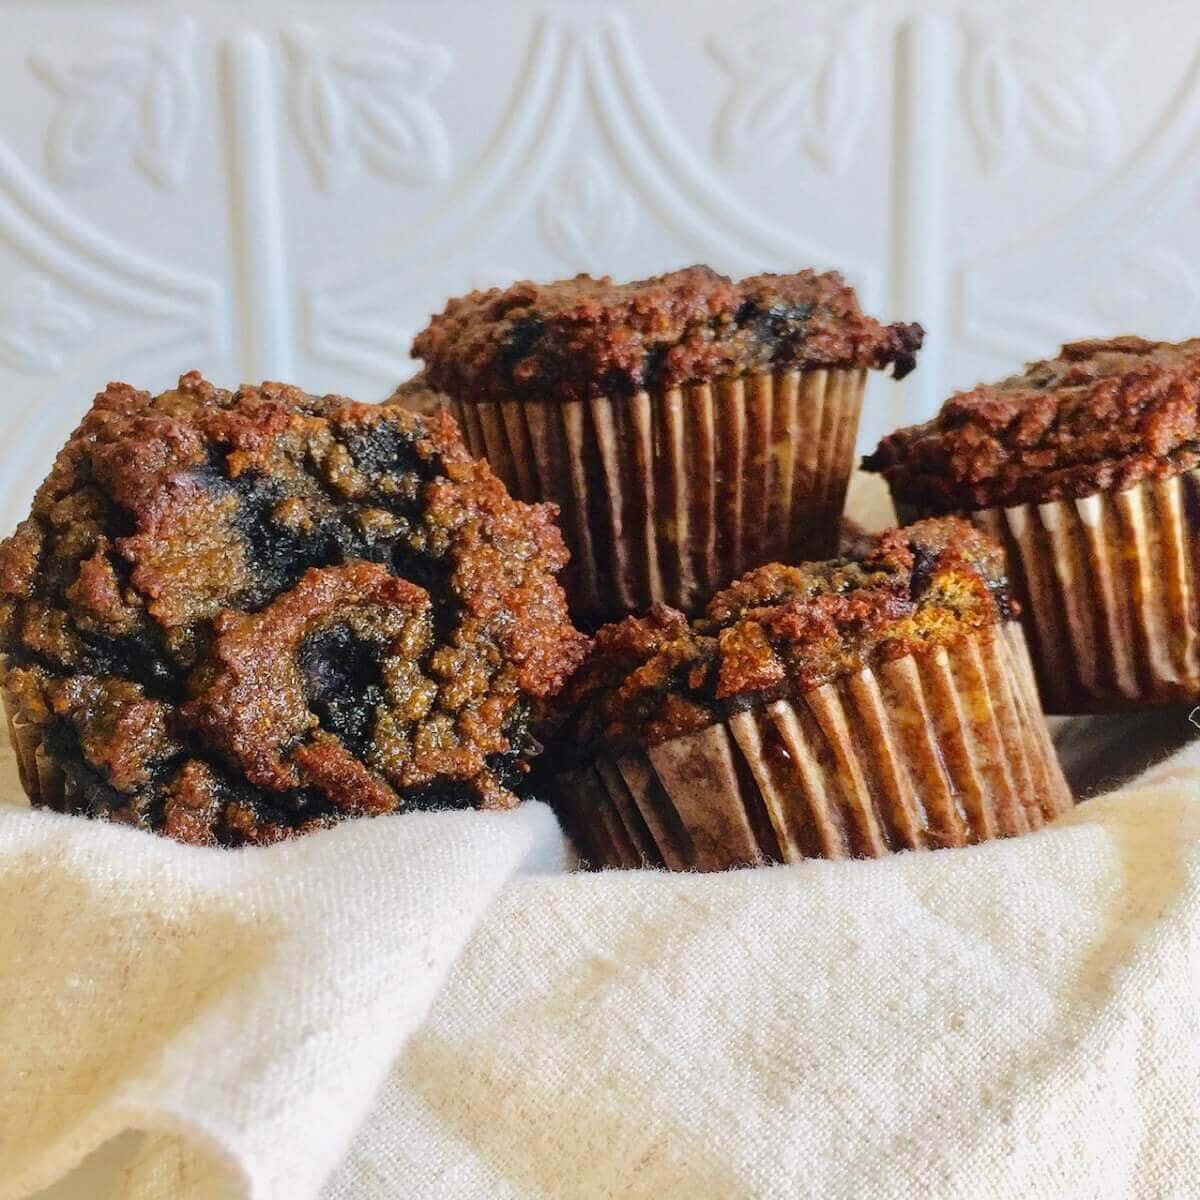 Healthy Blueberry Muffins in a light colored towel.